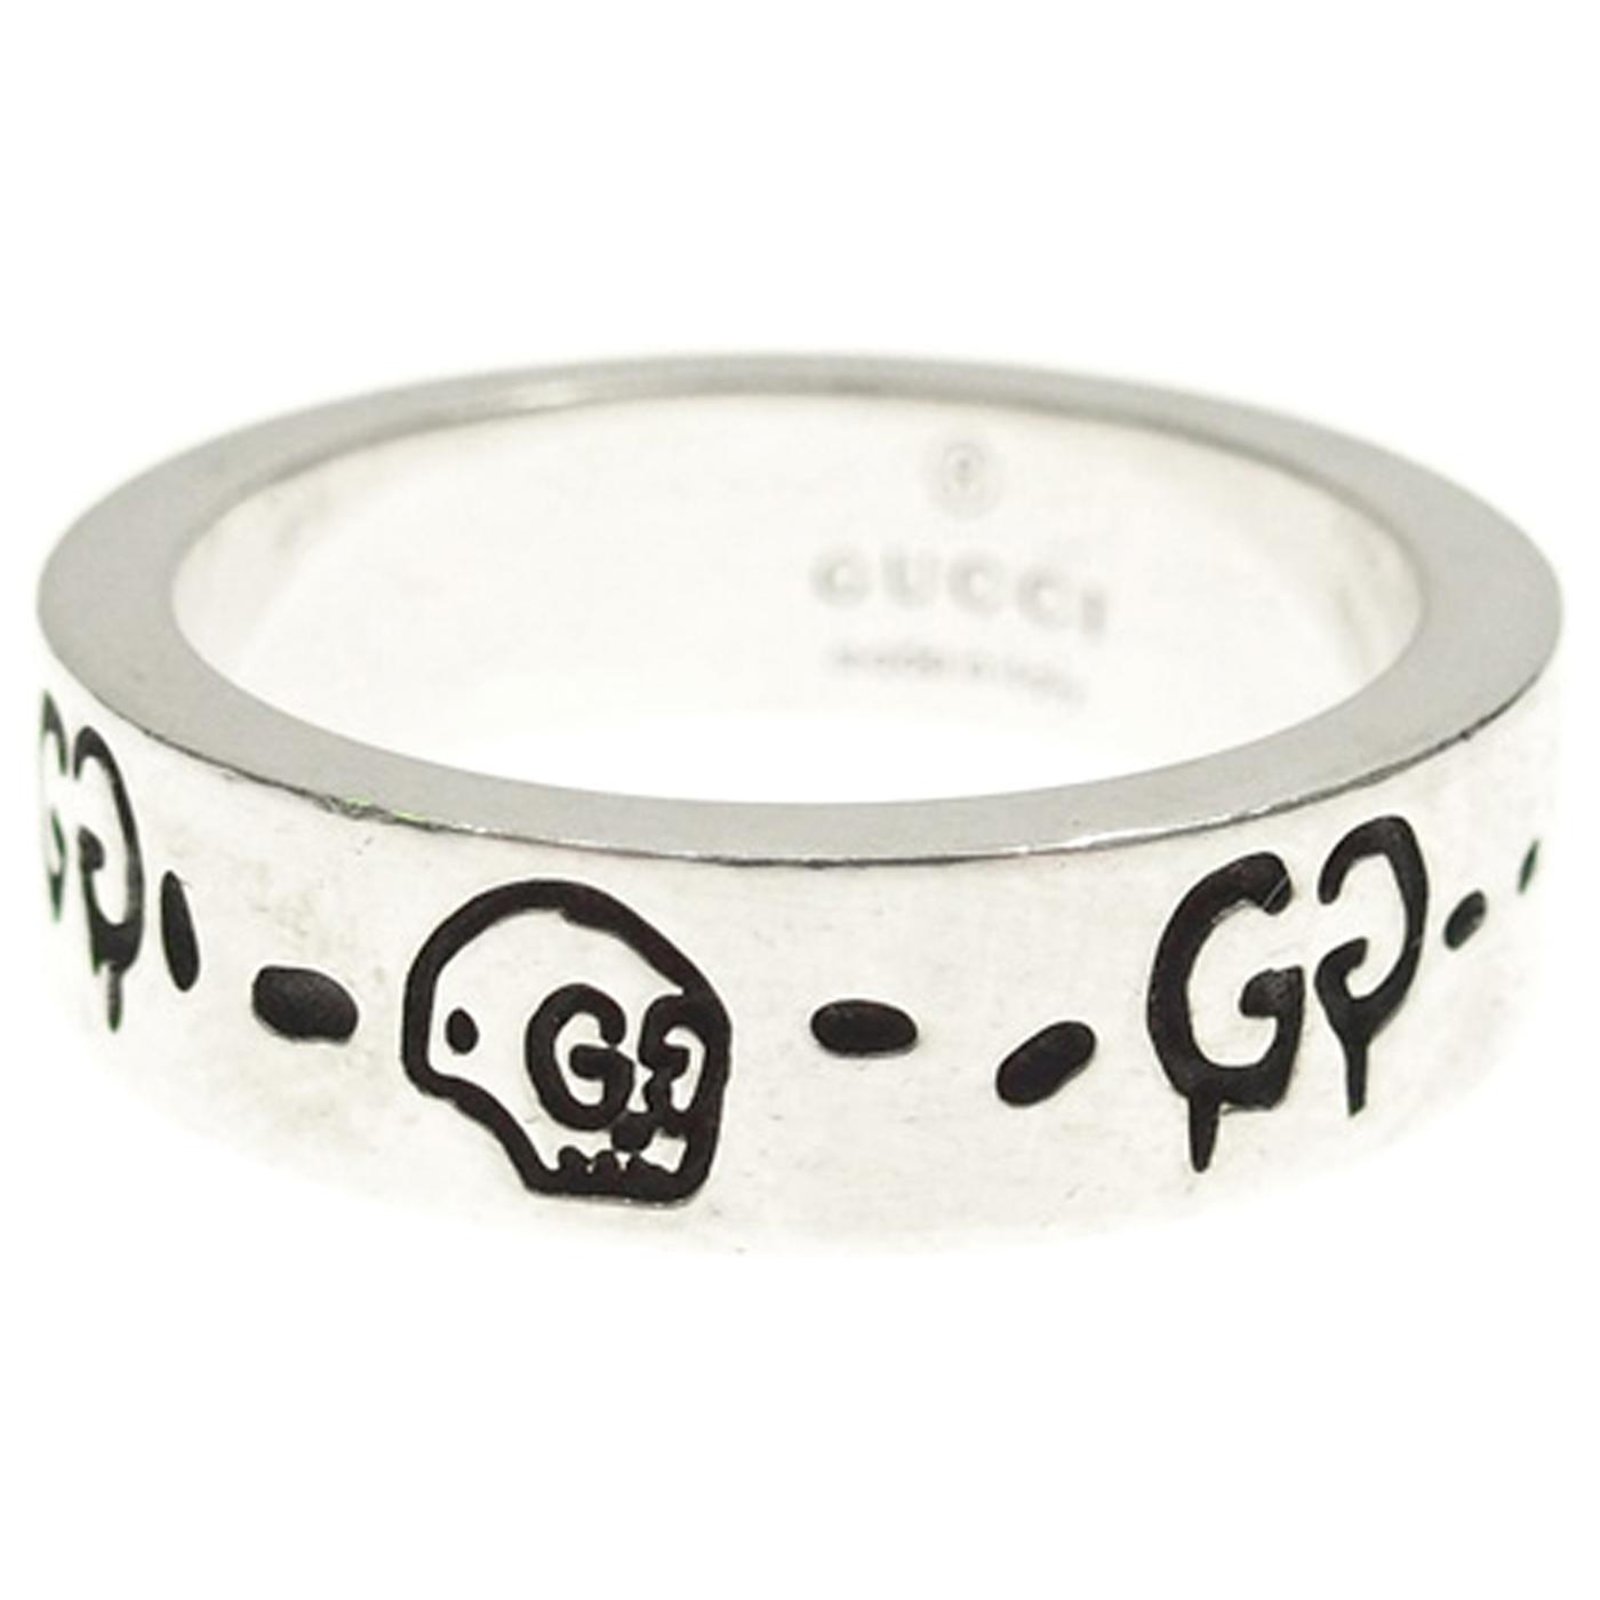 gucci silver ghost ring